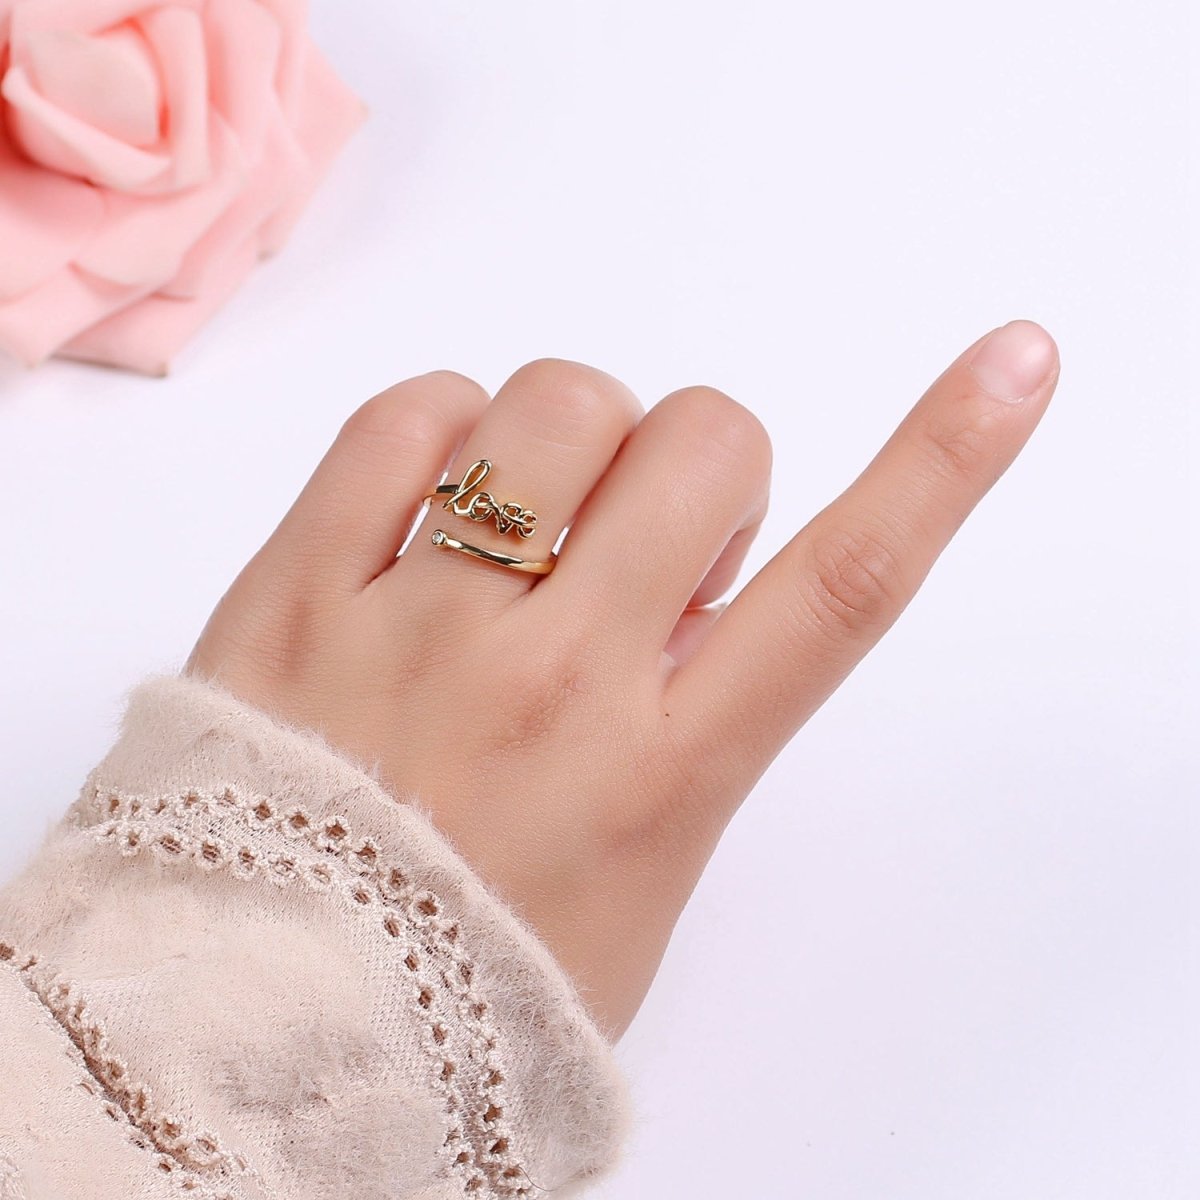 24k Gold Filled Adjustable Open Ring Love Ring Word Ring Relationship Gift Promise Ring Trendy For Jewelry Making Supplies - DLUXCA